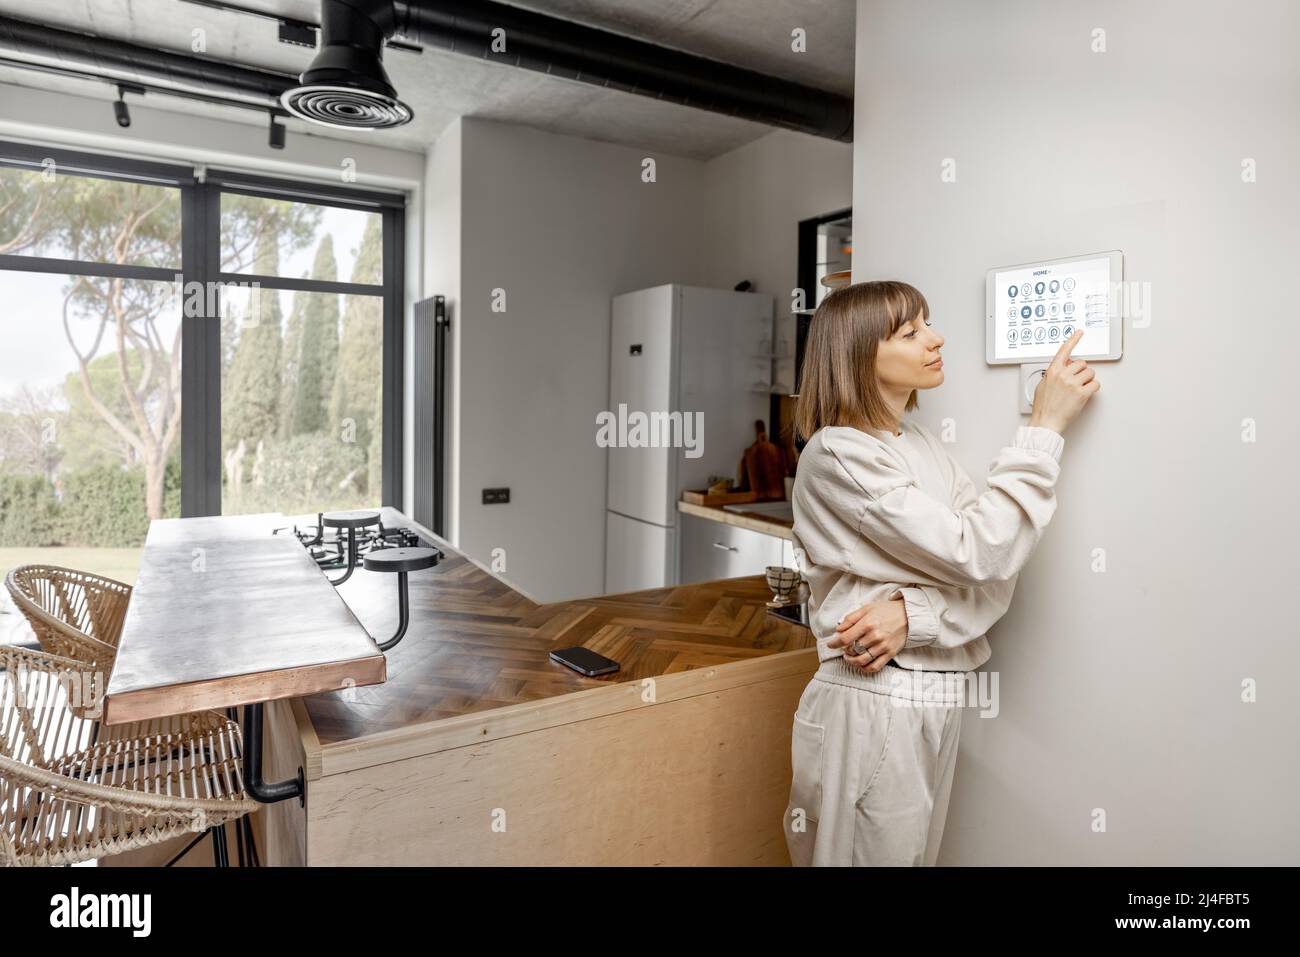 Woman controlling home devices with digital smart panel mounted on the wall Stock Photo